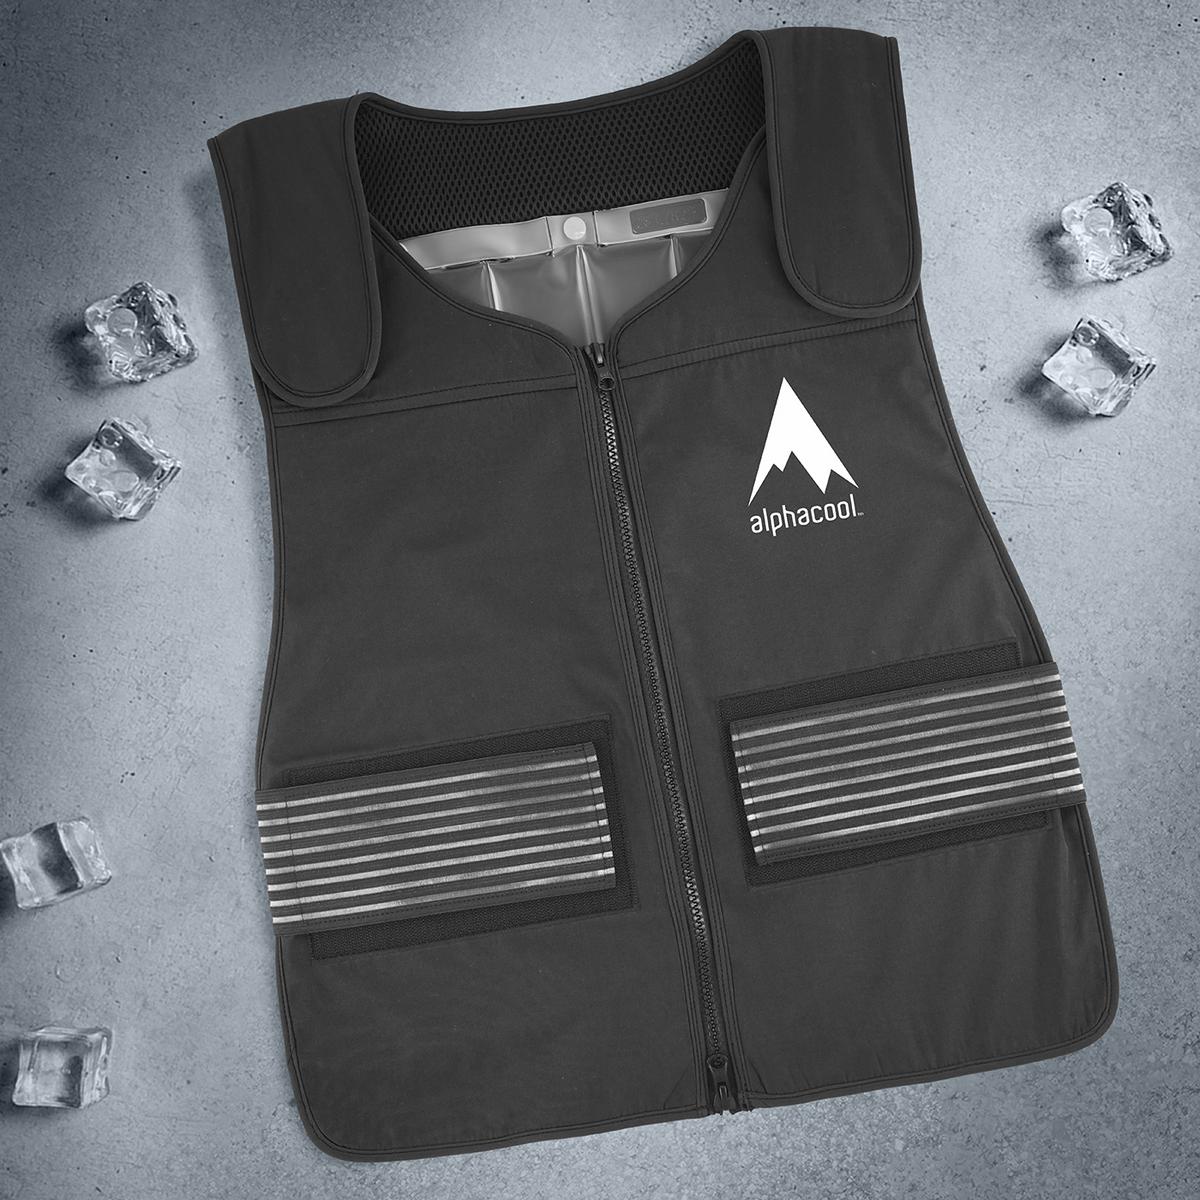 AlphaCool Tundra Phase Change Cooling Vest - Info